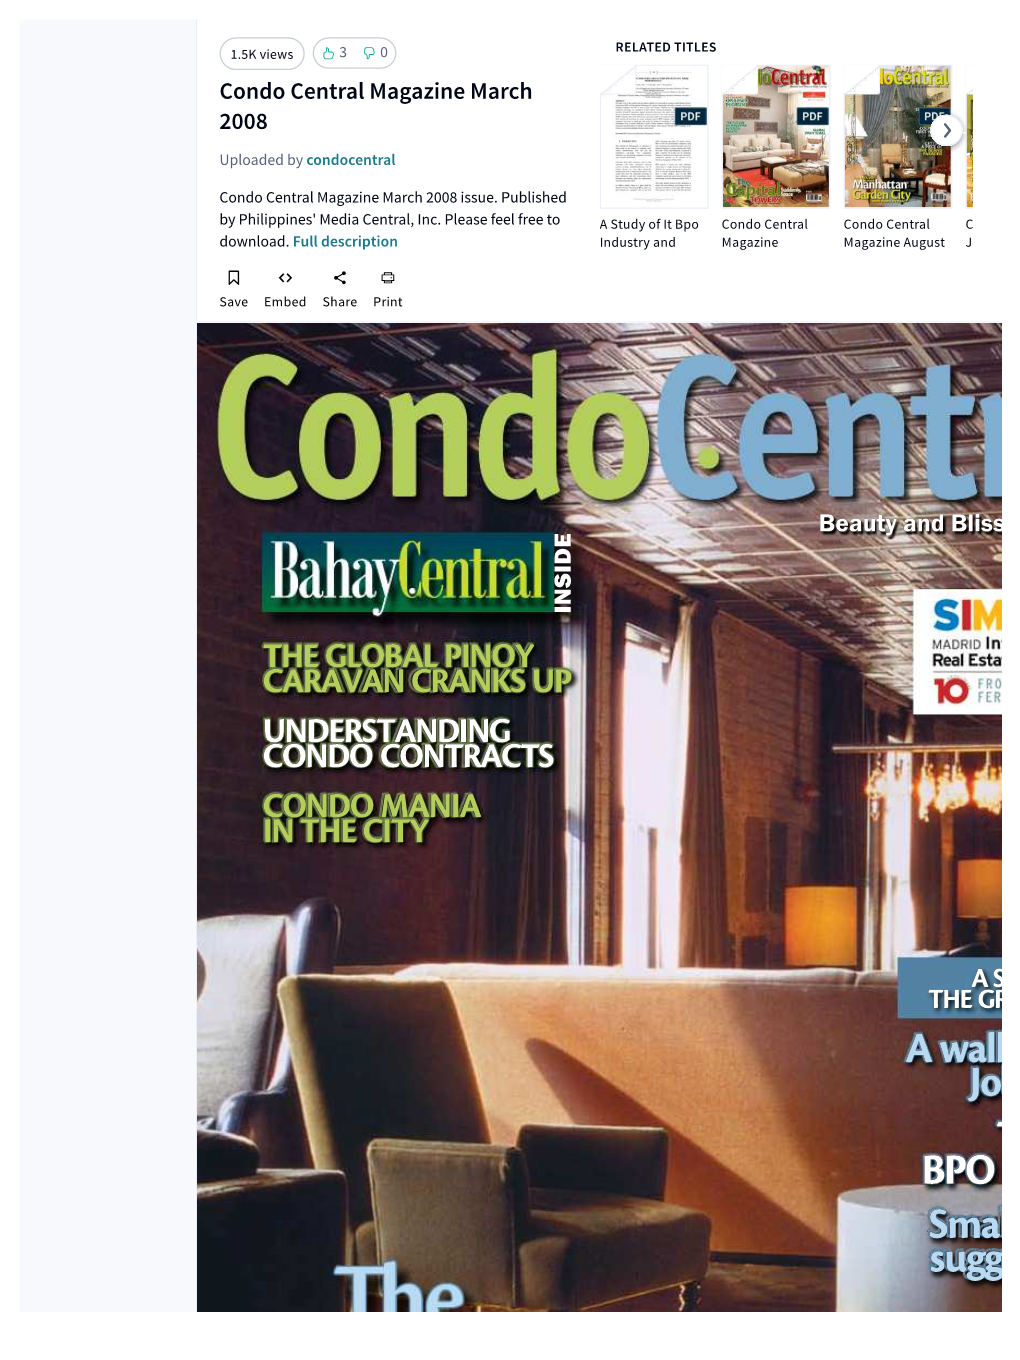 Condo Central Magazine March 2008  Uploaded by Condocentral